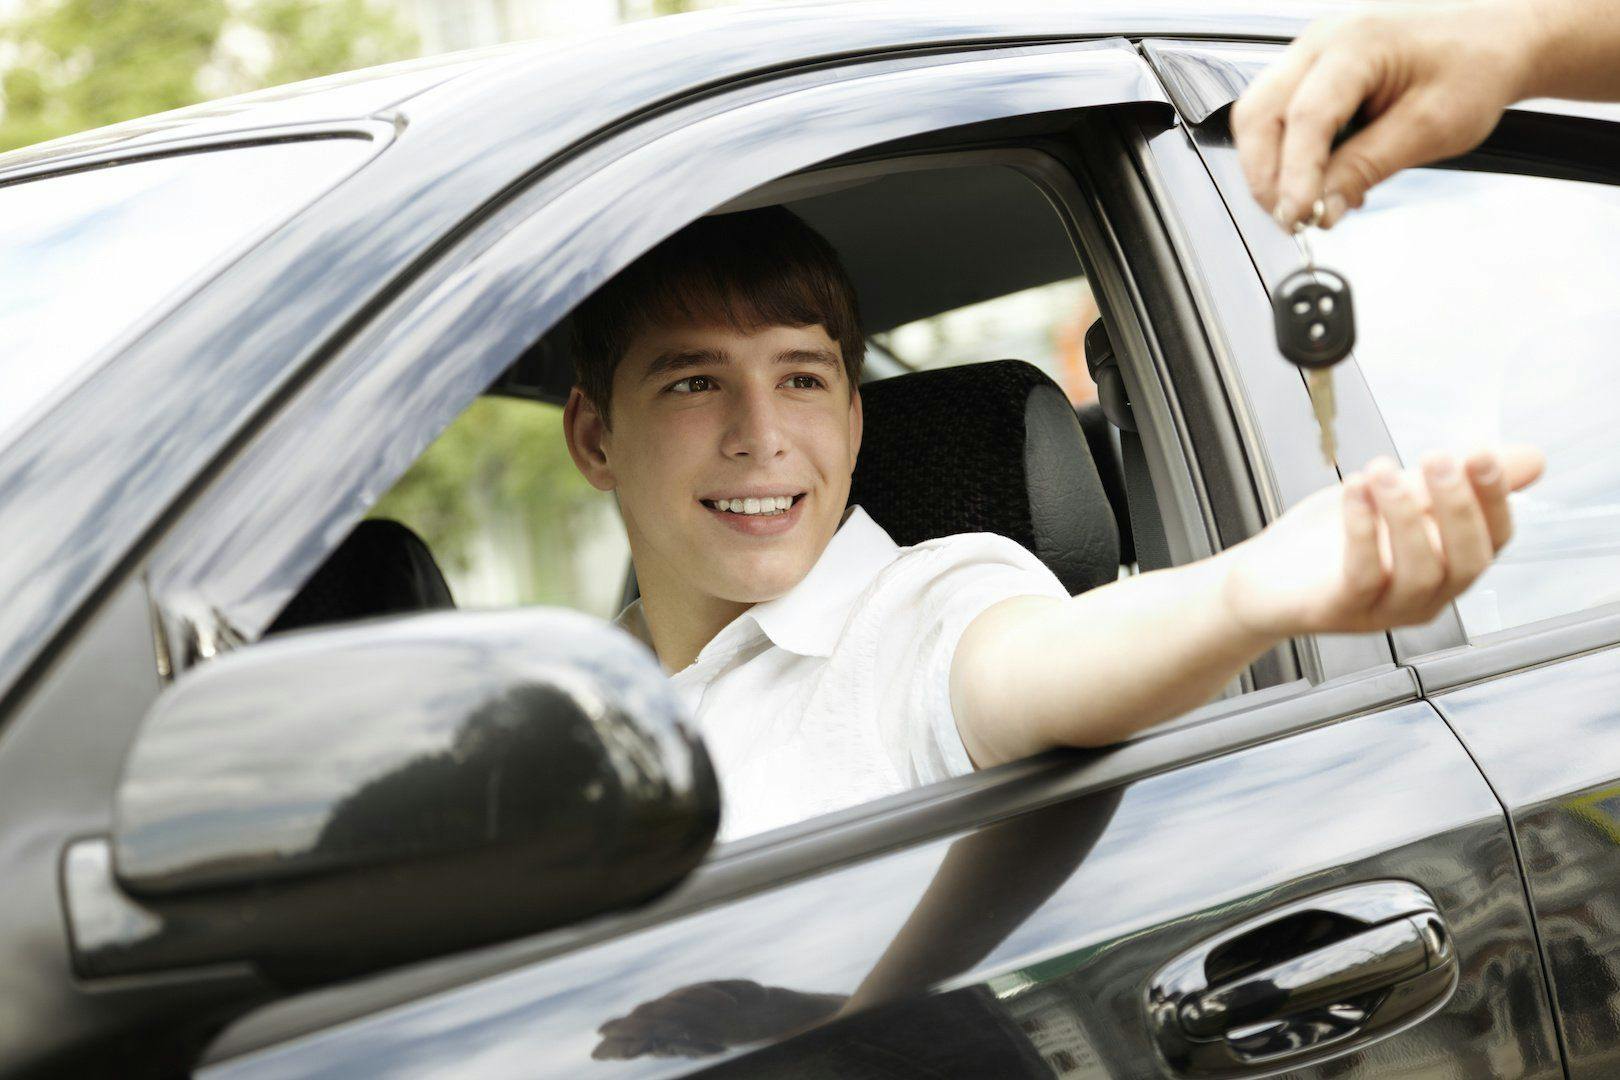 What's key to safe teen driving